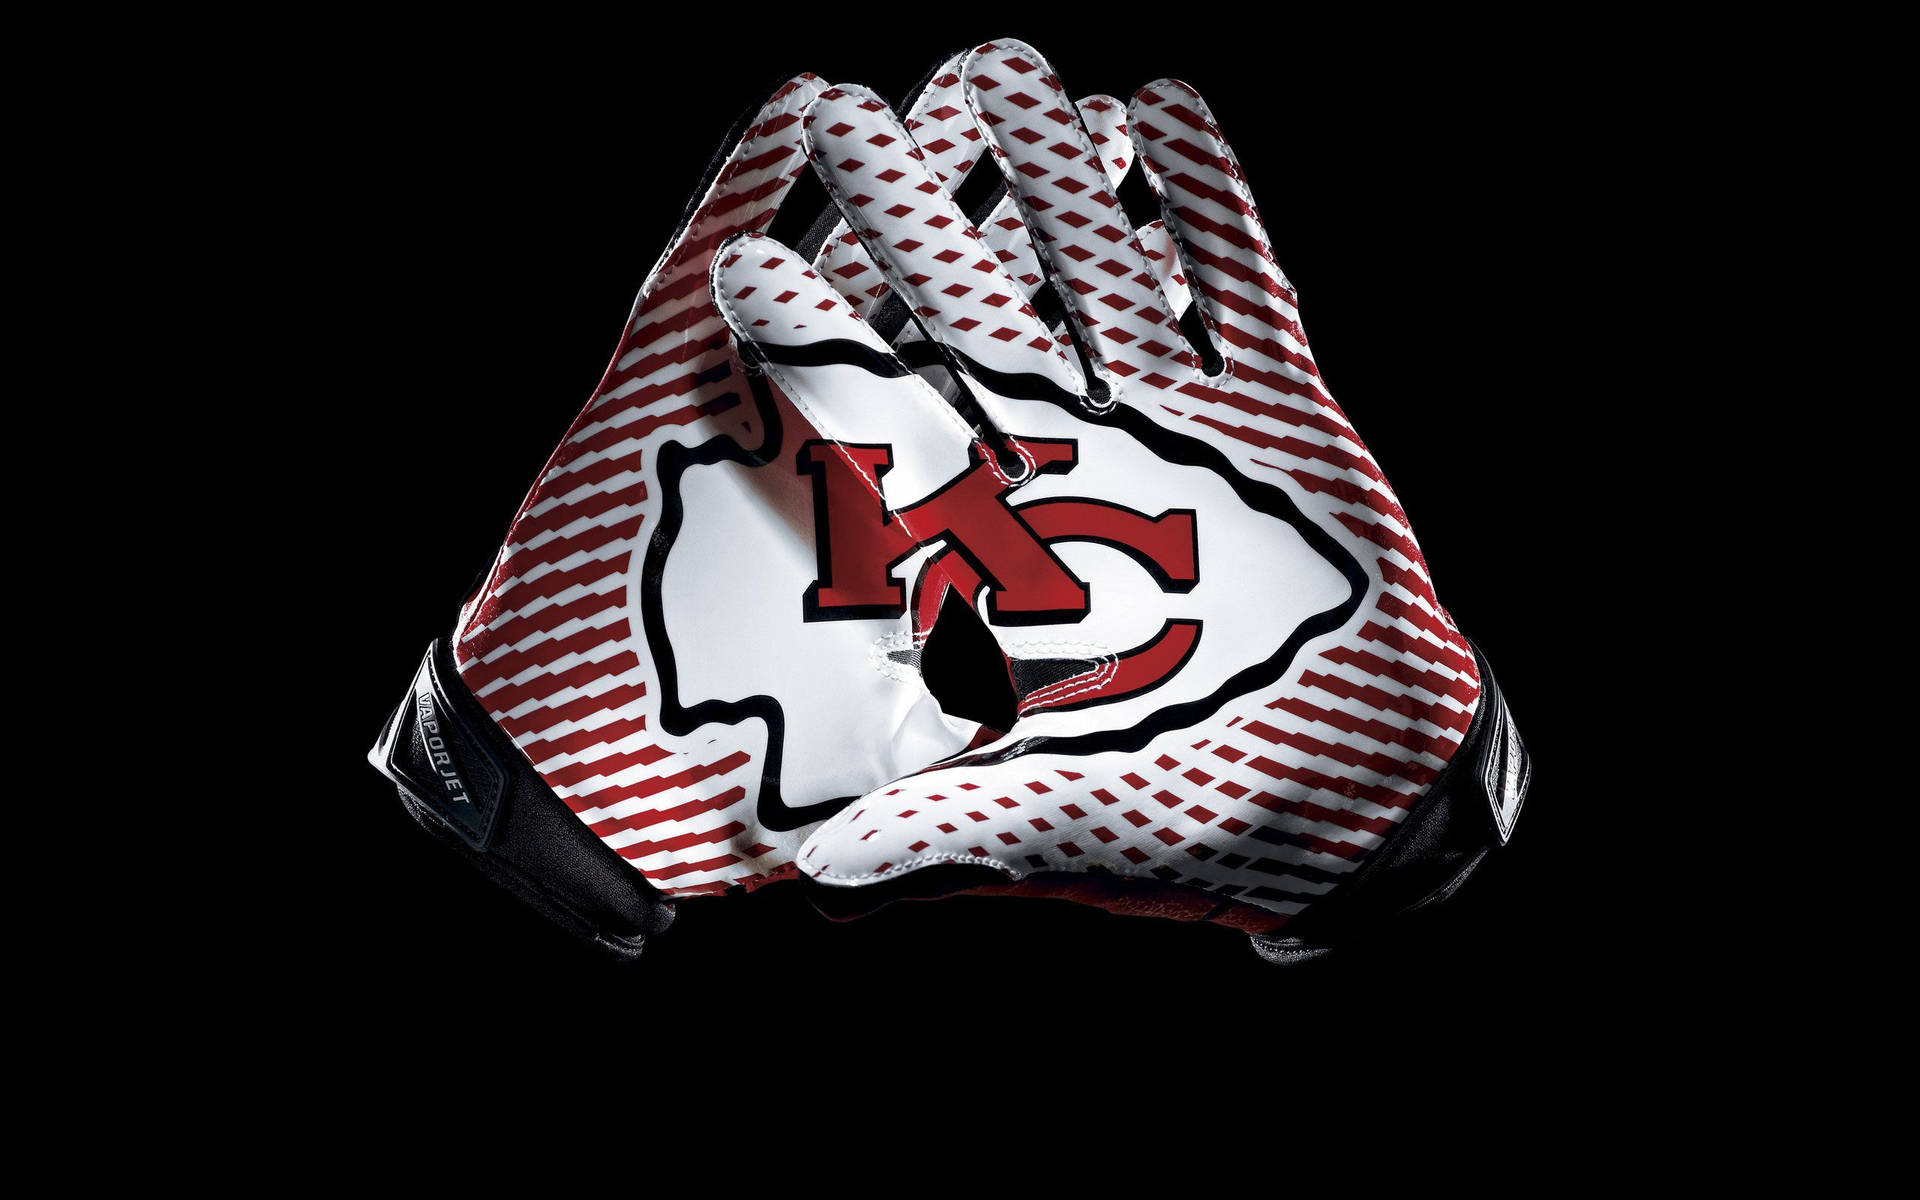 Get Ready For Action As The Chiefs Take The Field! Wallpaper